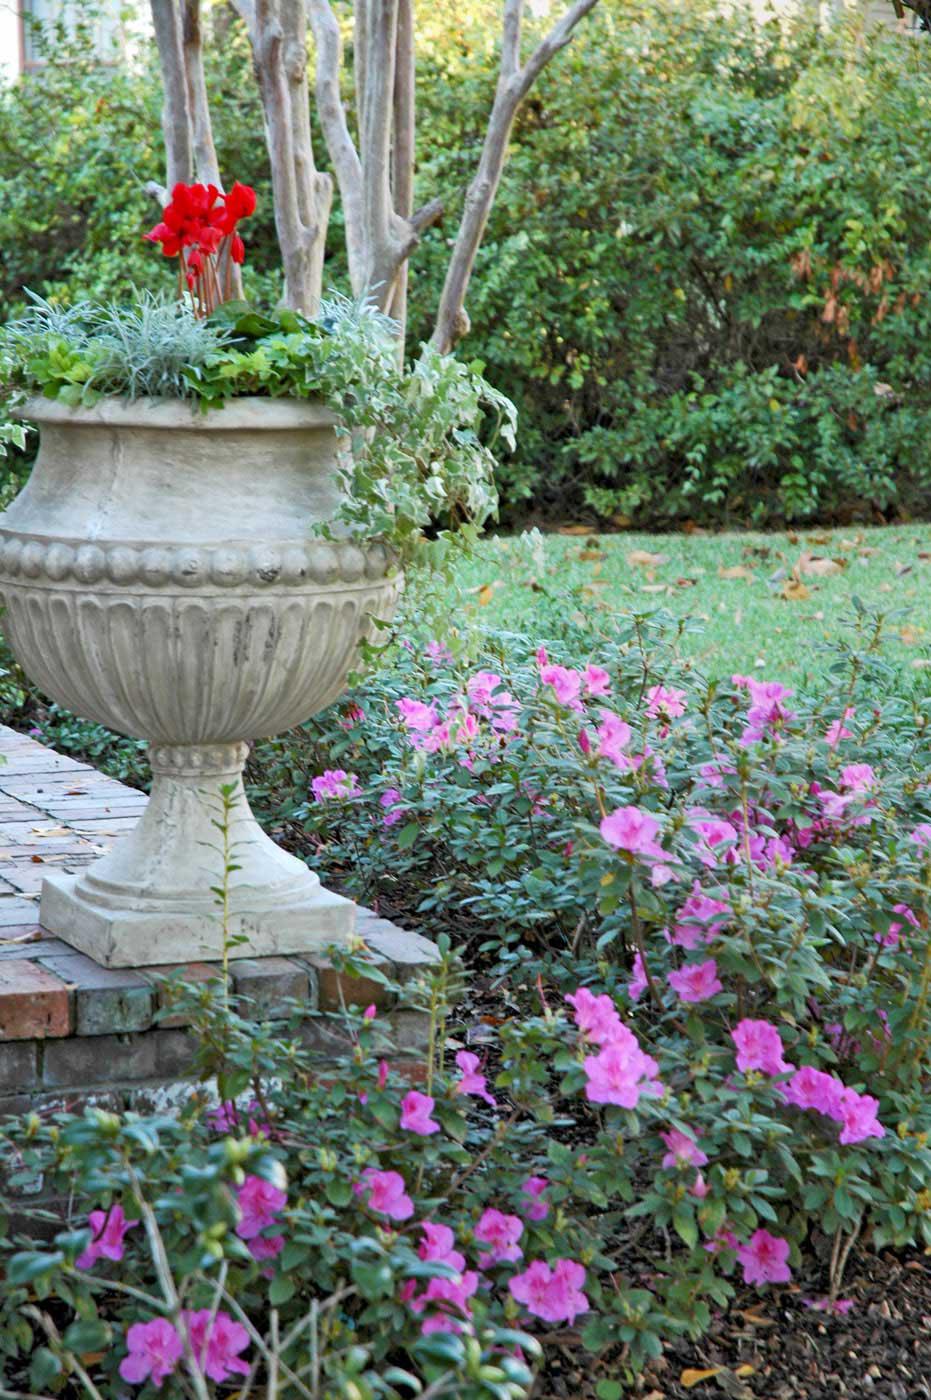 Encore azaleas will provide spring-like blooms even as the Christmas holidays approach.  